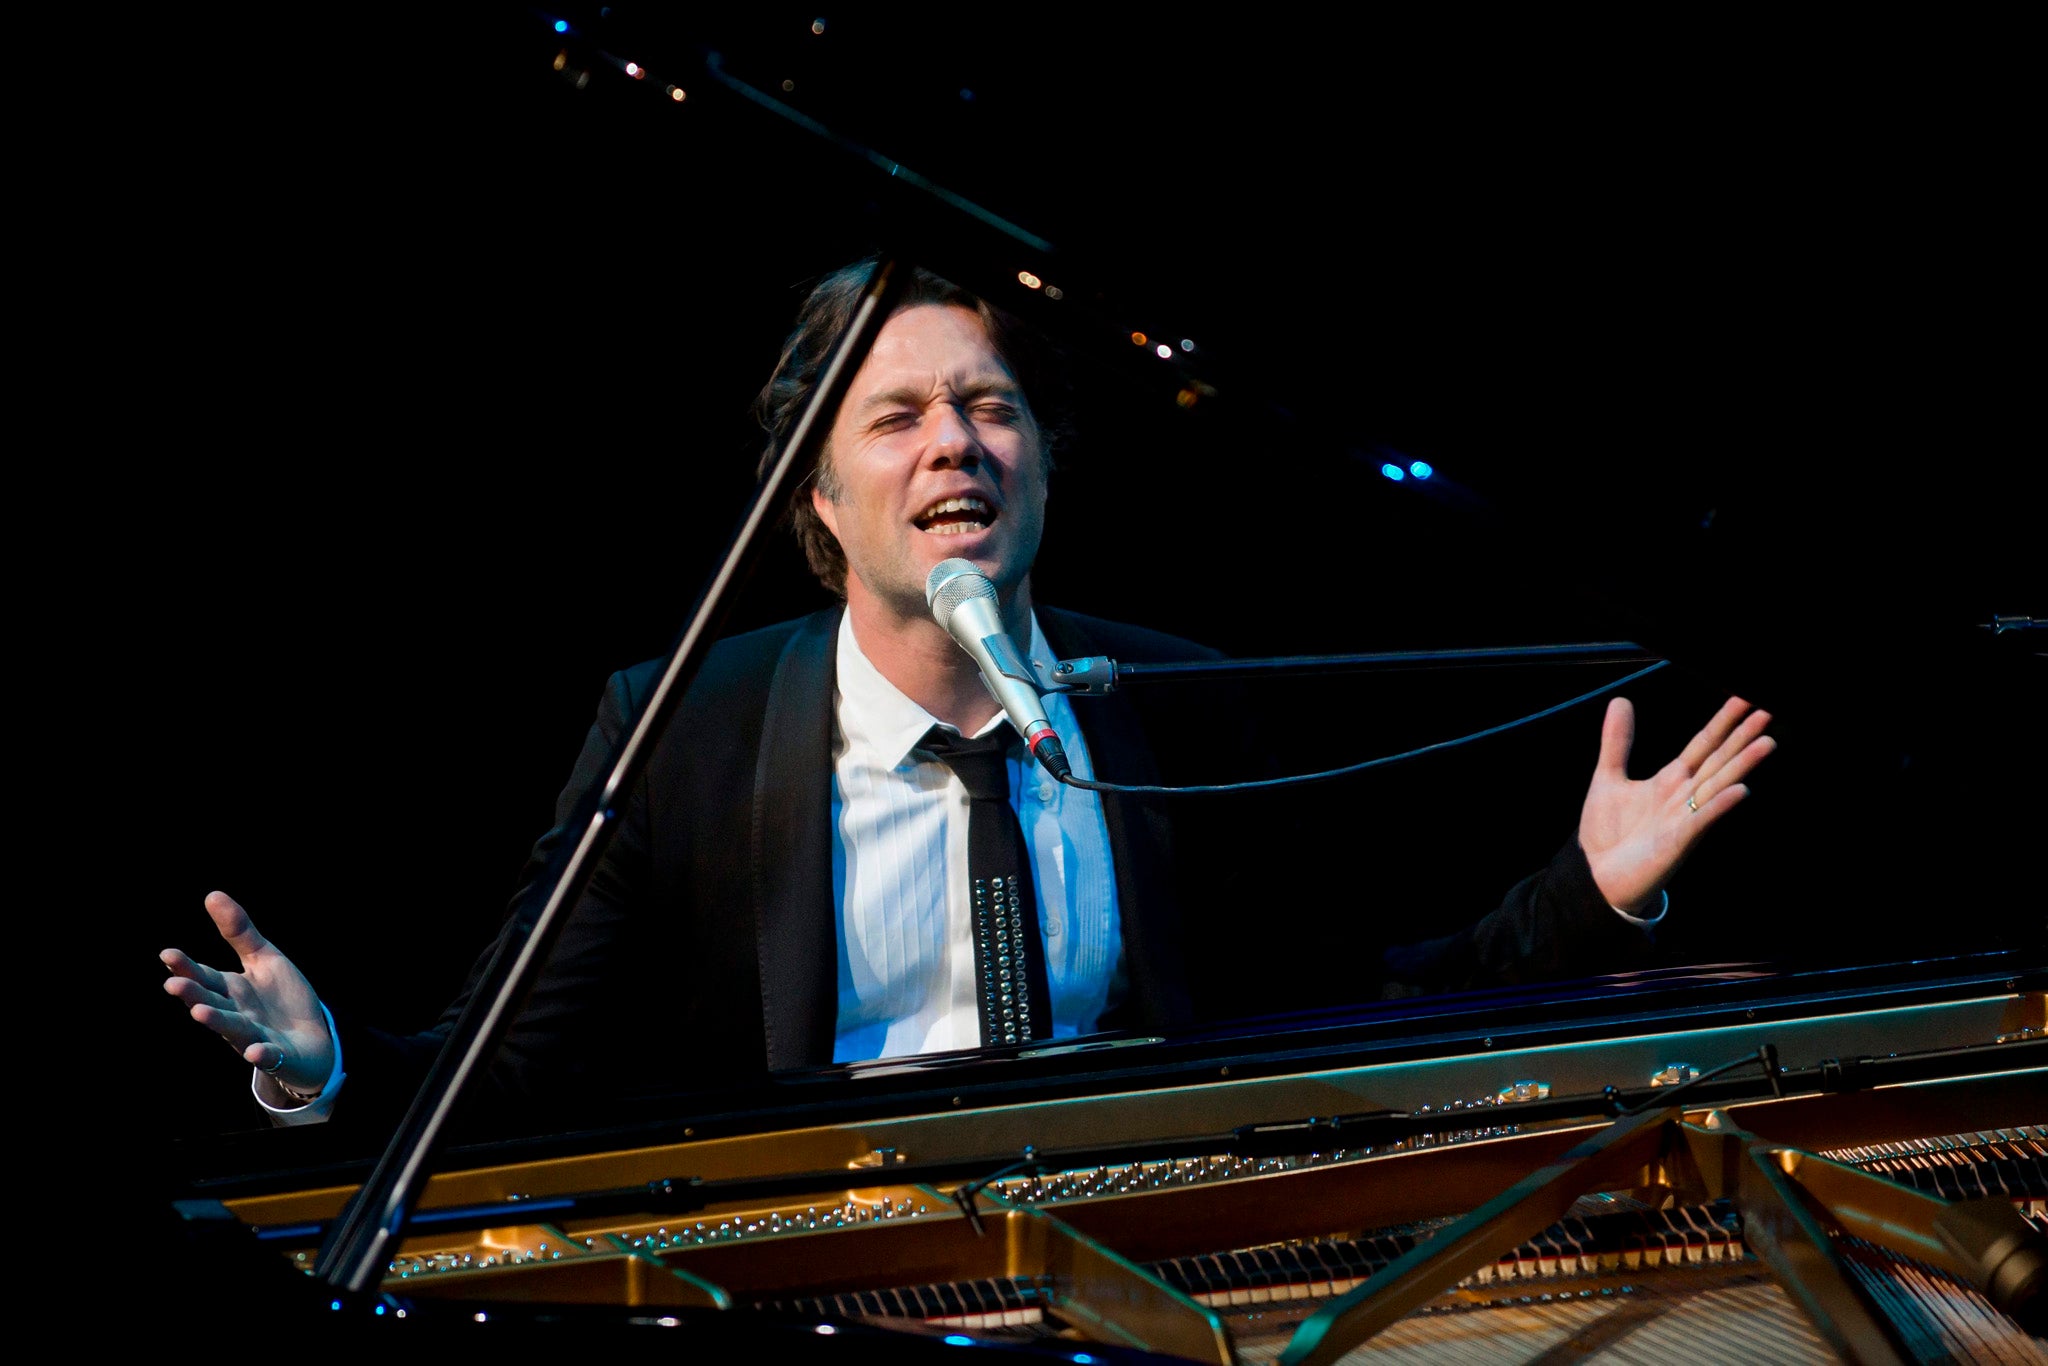 American-Canadian singer Rufus Wainwright performs on stage